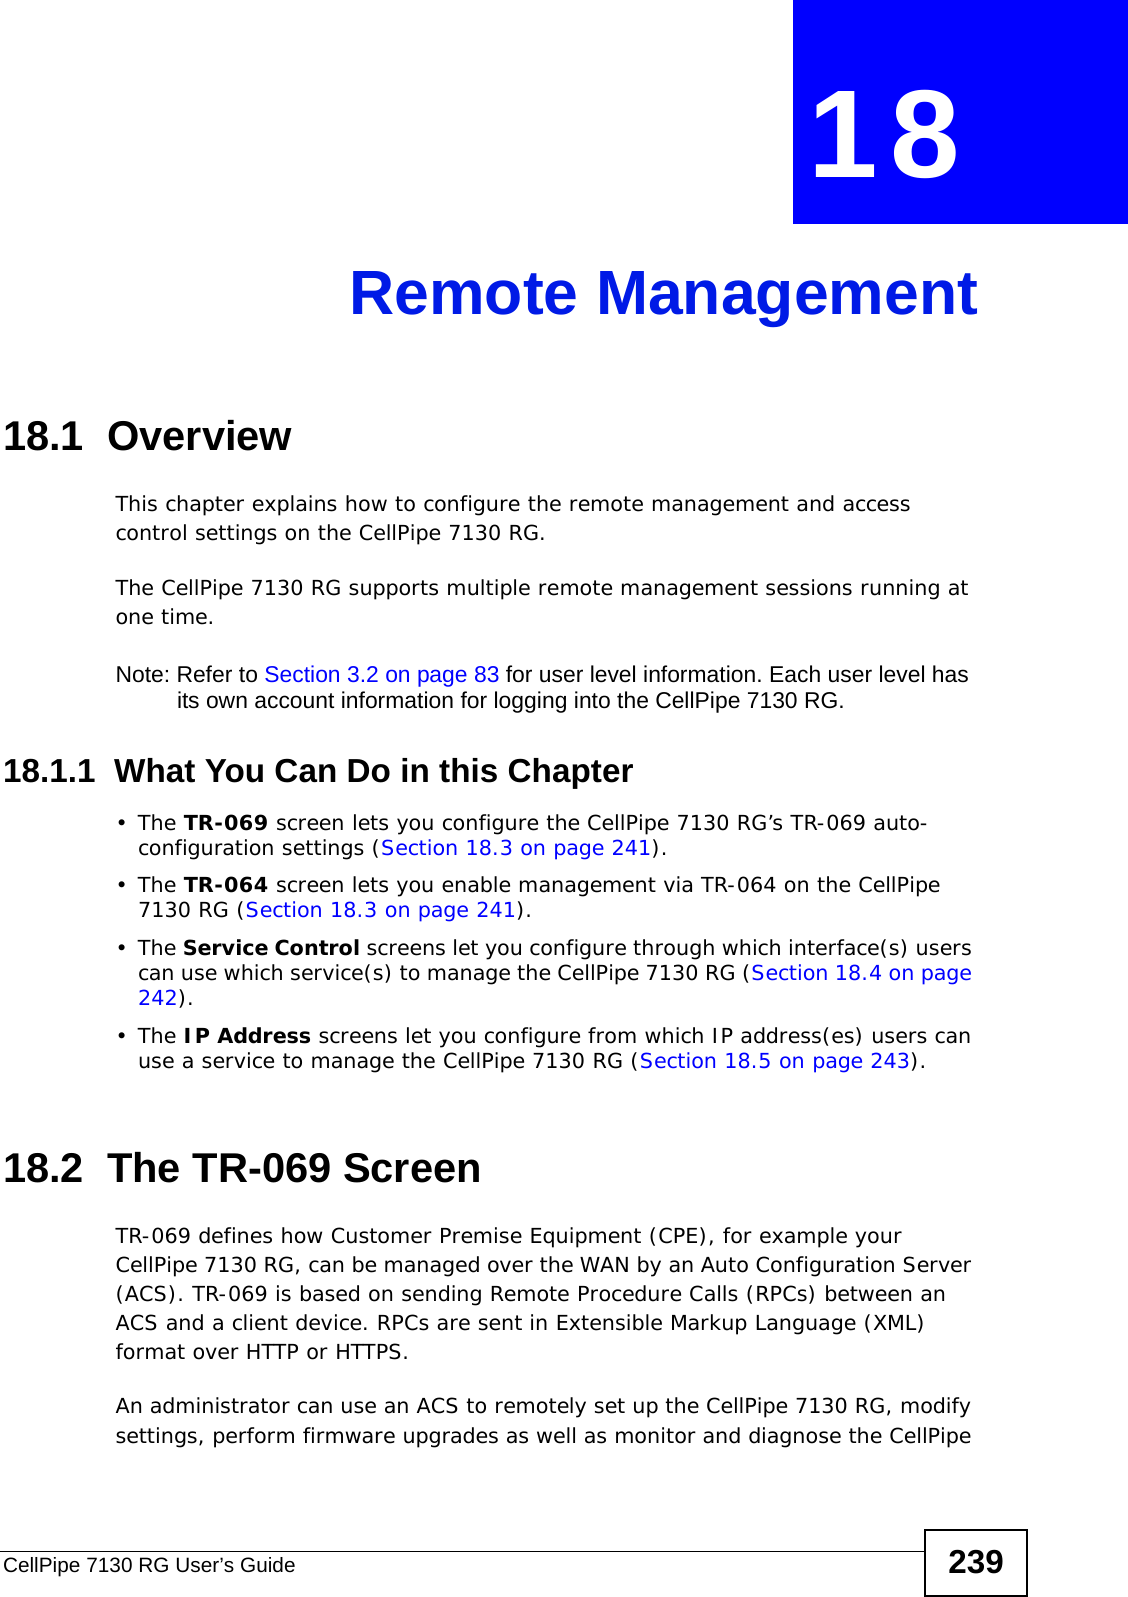 CellPipe 7130 RG User’s Guide 239CHAPTER  18 Remote Management18.1  OverviewThis chapter explains how to configure the remote management and access control settings on the CellPipe 7130 RG.The CellPipe 7130 RG supports multiple remote management sessions running at one time.Note: Refer to Section 3.2 on page 83 for user level information. Each user level has its own account information for logging into the CellPipe 7130 RG.18.1.1  What You Can Do in this Chapter•The TR-069 screen lets you configure the CellPipe 7130 RG’s TR-069 auto-configuration settings (Section 18.3 on page 241).•The TR-064 screen lets you enable management via TR-064 on the CellPipe 7130 RG (Section 18.3 on page 241).•The Service Control screens let you configure through which interface(s) users can use which service(s) to manage the CellPipe 7130 RG (Section 18.4 on page 242).•The IP Address screens let you configure from which IP address(es) users can use a service to manage the CellPipe 7130 RG (Section 18.5 on page 243).18.2  The TR-069 ScreenTR-069 defines how Customer Premise Equipment (CPE), for example your CellPipe 7130 RG, can be managed over the WAN by an Auto Configuration Server (ACS). TR-069 is based on sending Remote Procedure Calls (RPCs) between an ACS and a client device. RPCs are sent in Extensible Markup Language (XML) format over HTTP or HTTPS. An administrator can use an ACS to remotely set up the CellPipe 7130 RG, modify settings, perform firmware upgrades as well as monitor and diagnose the CellPipe 